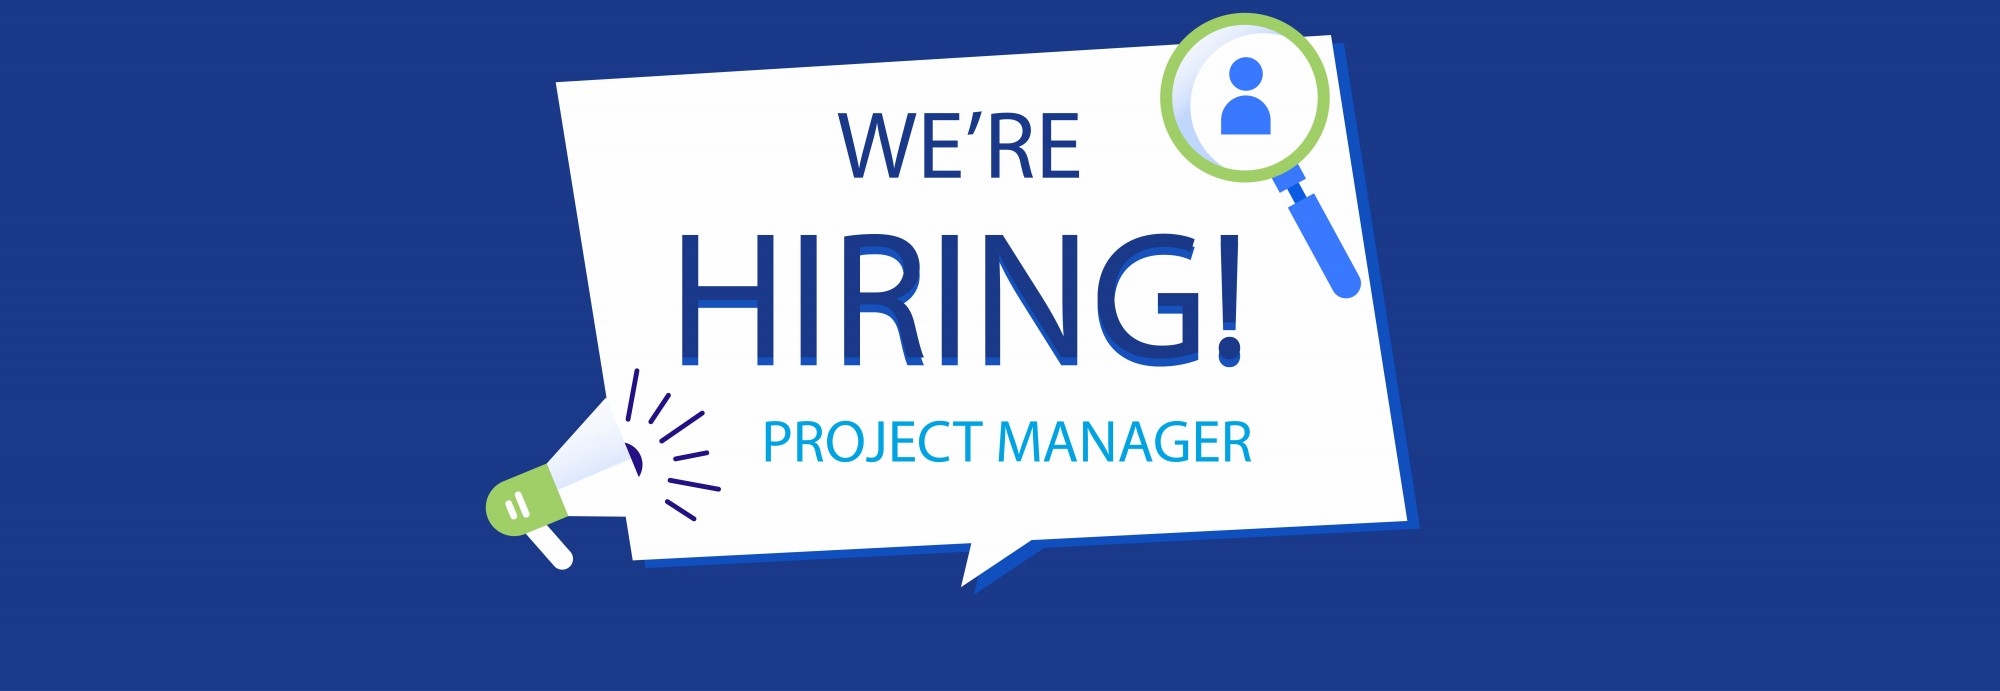 We're Hiring - Project Manager